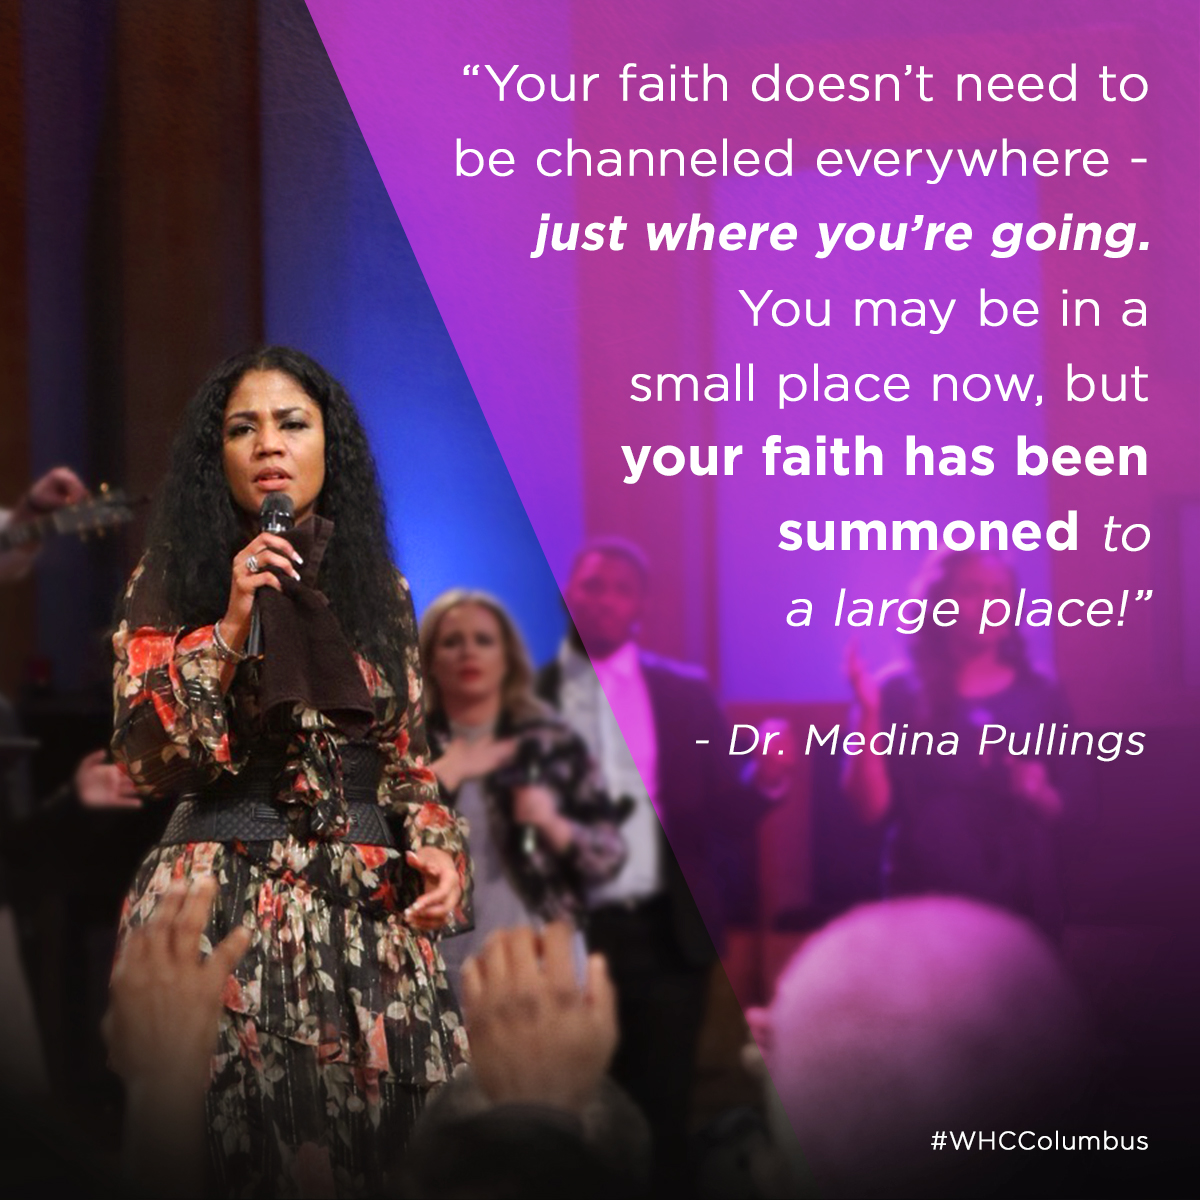 “Your faith doesn’t need to be channeled everywhere - just where you’re going. You may be in a small place now, bit your faith has been summoned to a large place!” – Dr. Medina Pullings